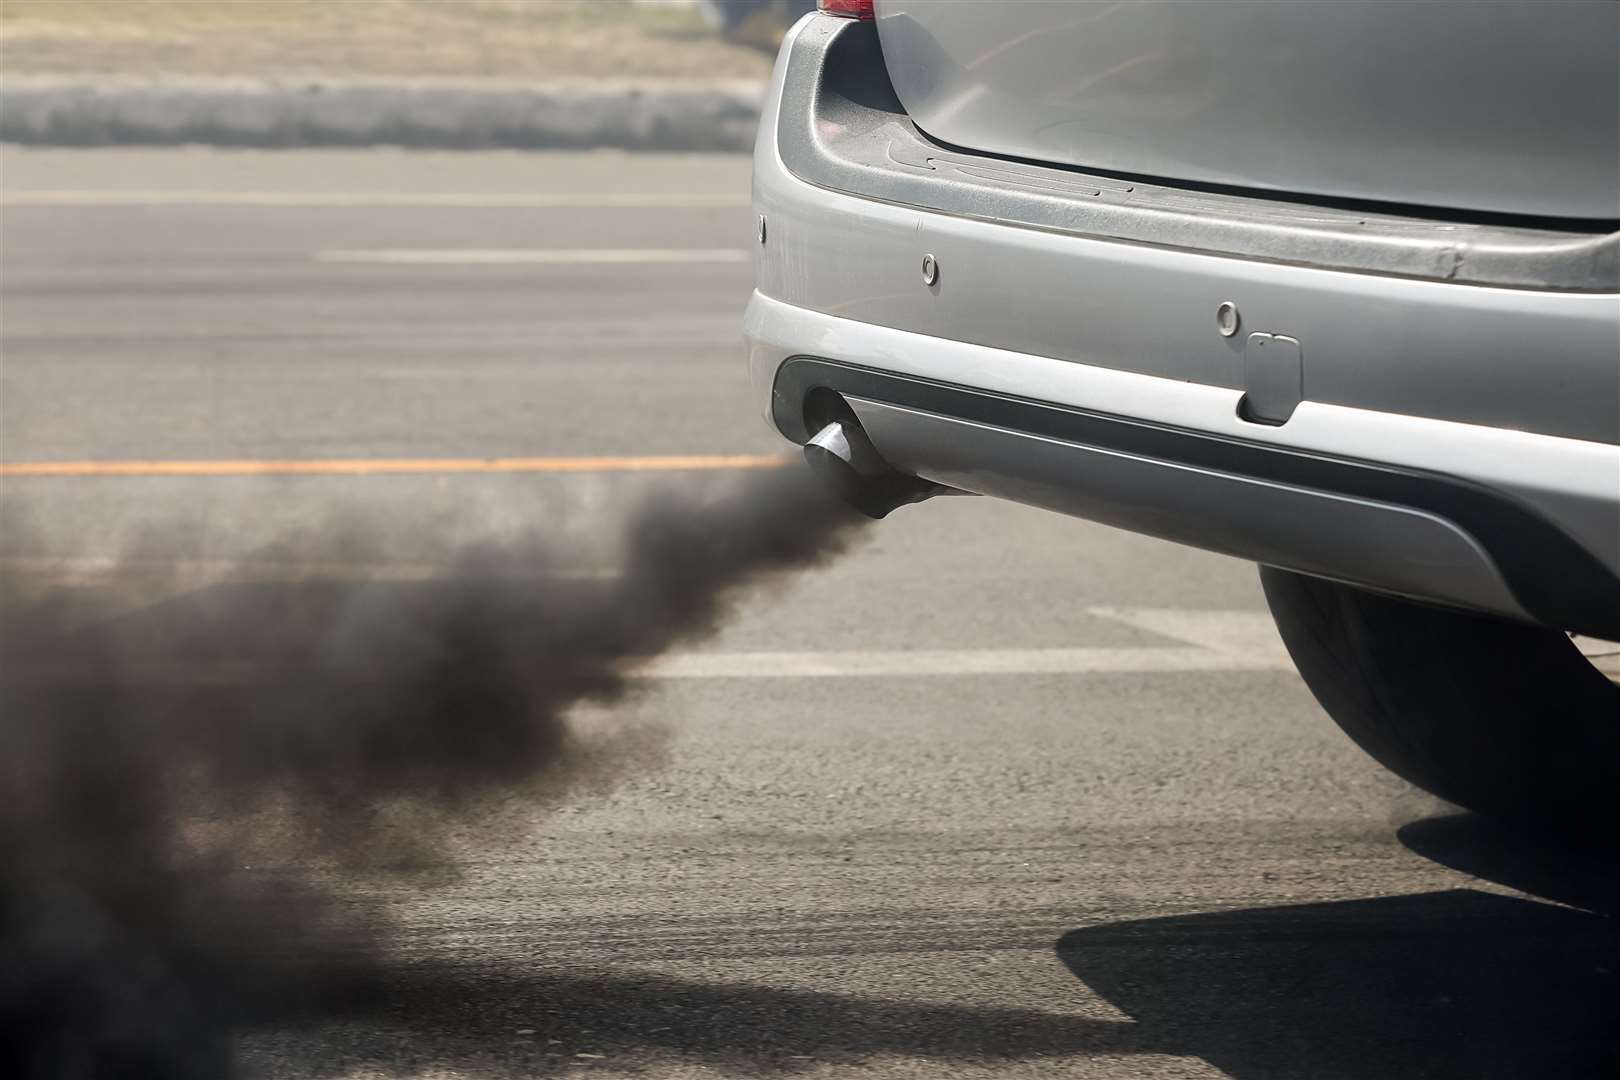 Air pollution from vehicle exhaust pipe on road. (17048454)